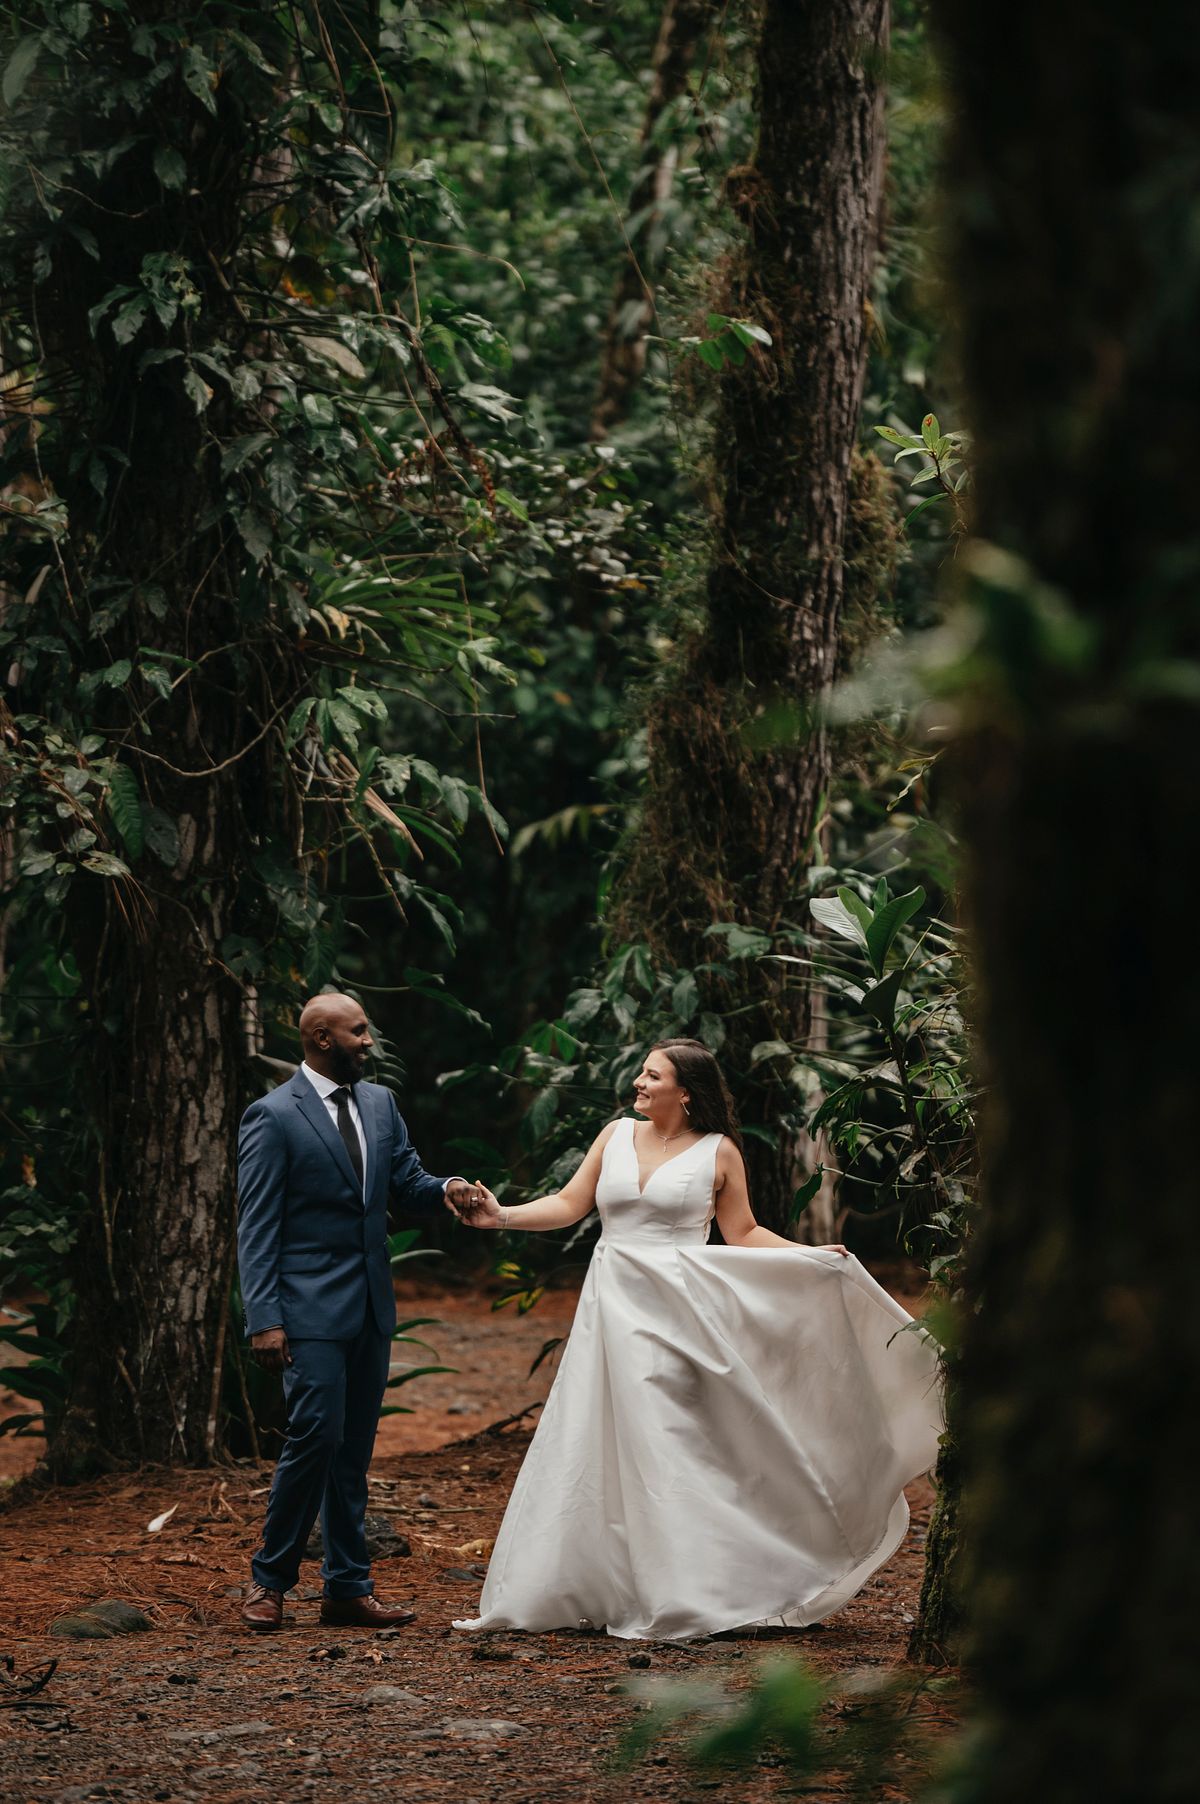 Natalie and Jimmy: Newlyweds Photoshoot at Arenal Observatory Lodge